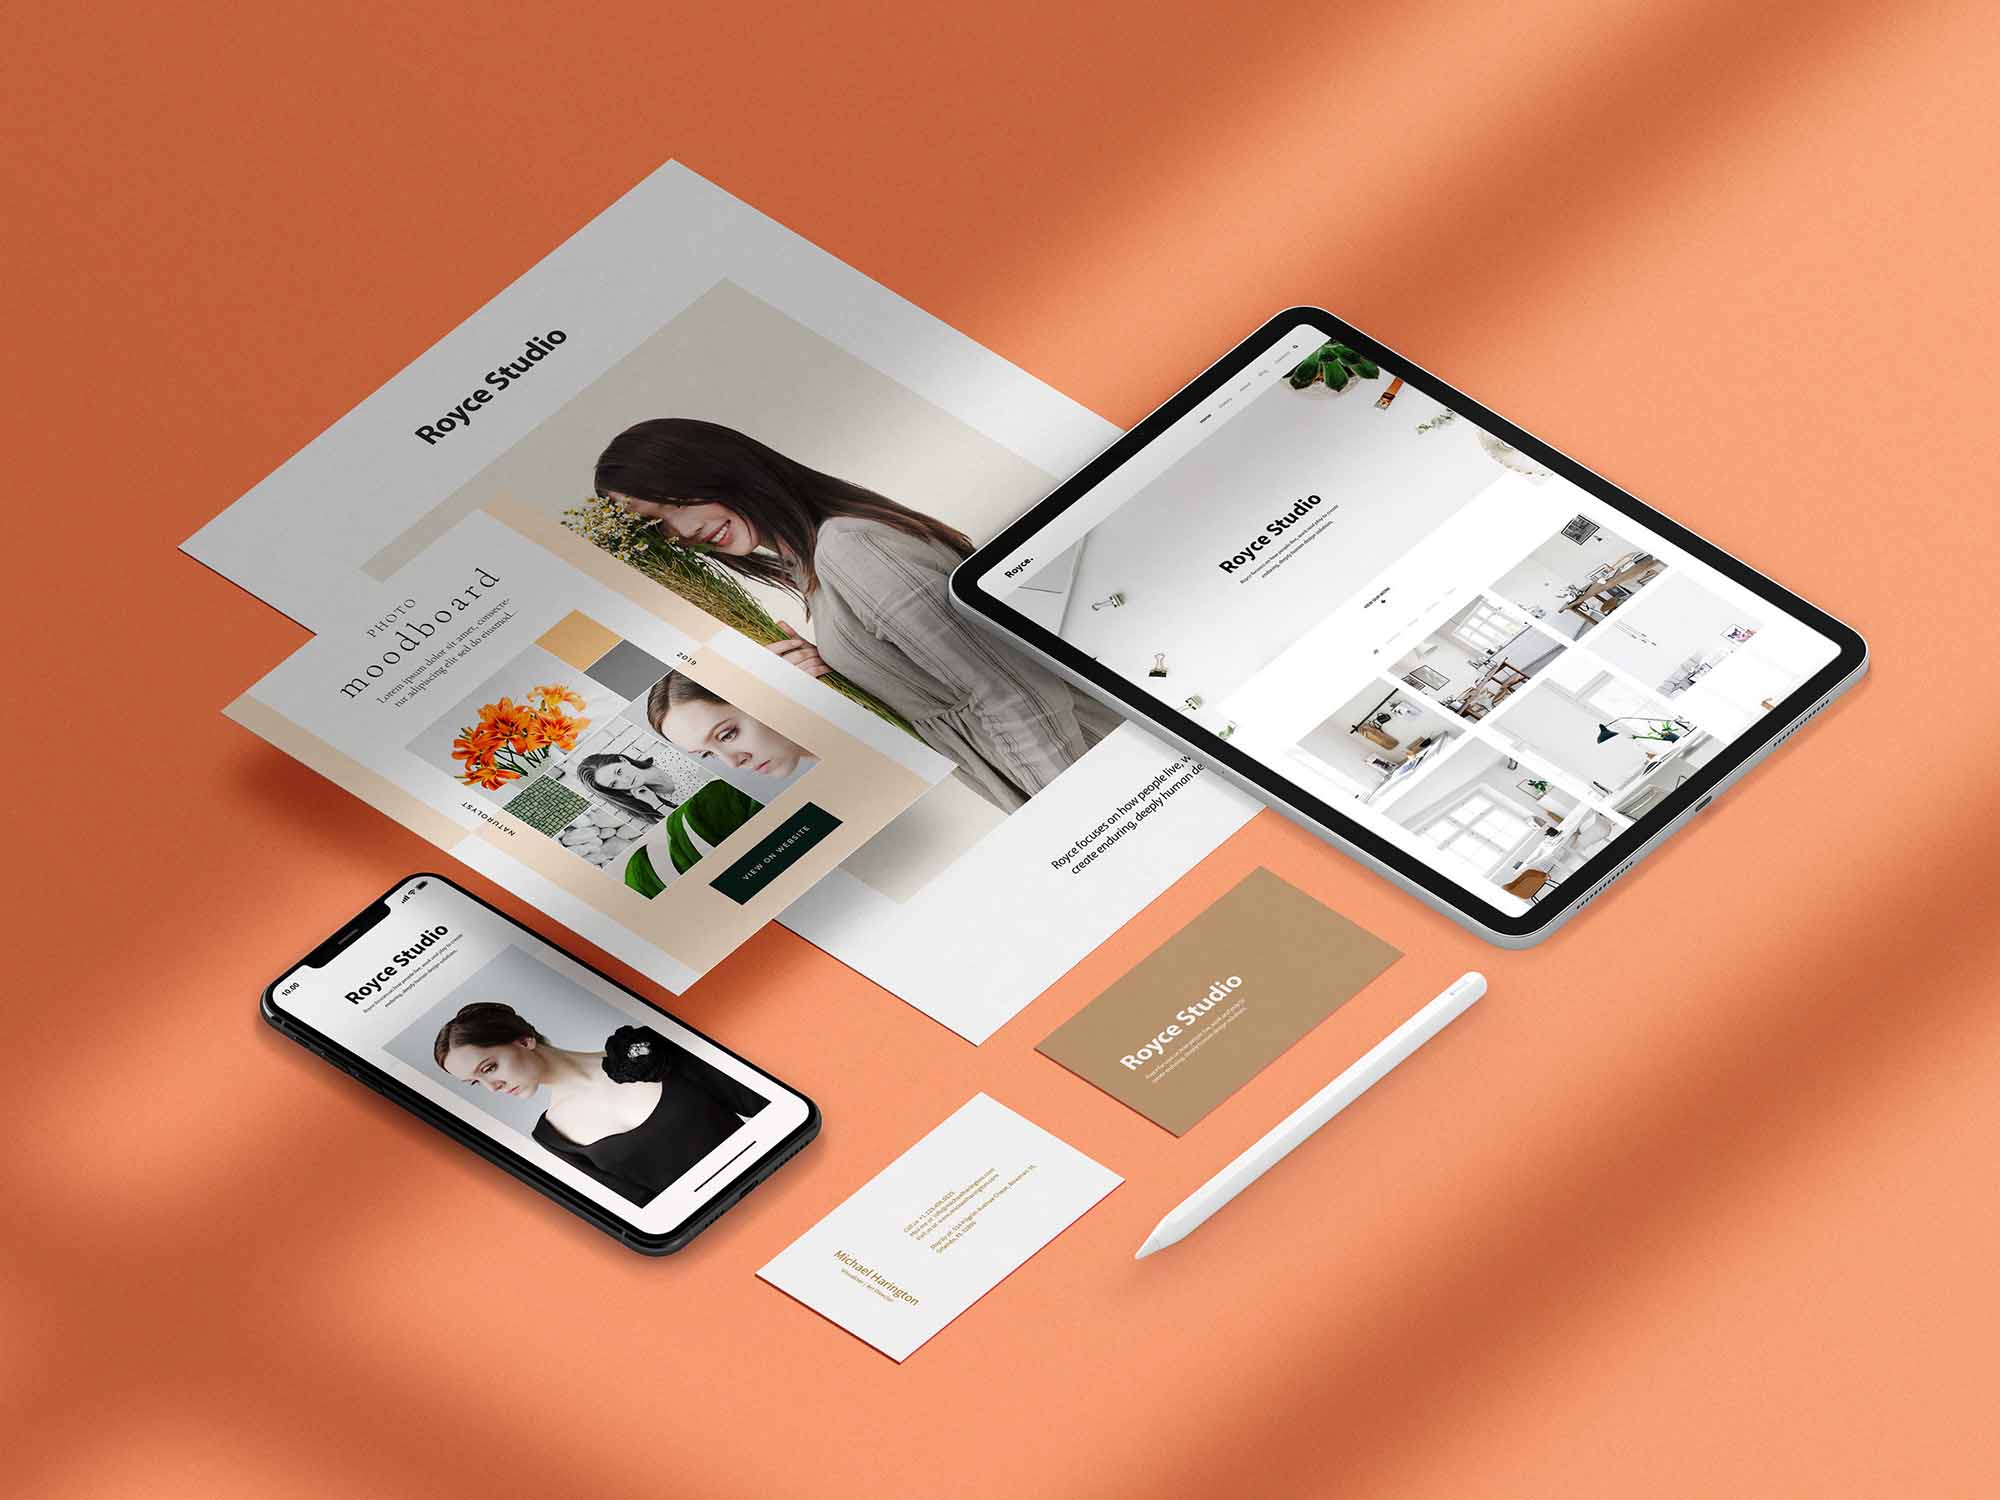 Download Pure Branding Mockup Kit Free Psd Mockups Free Psd Mockups Smart Object And Templates To Create Magazines Books Stationery Clothing Mobile Packaging Business Cards